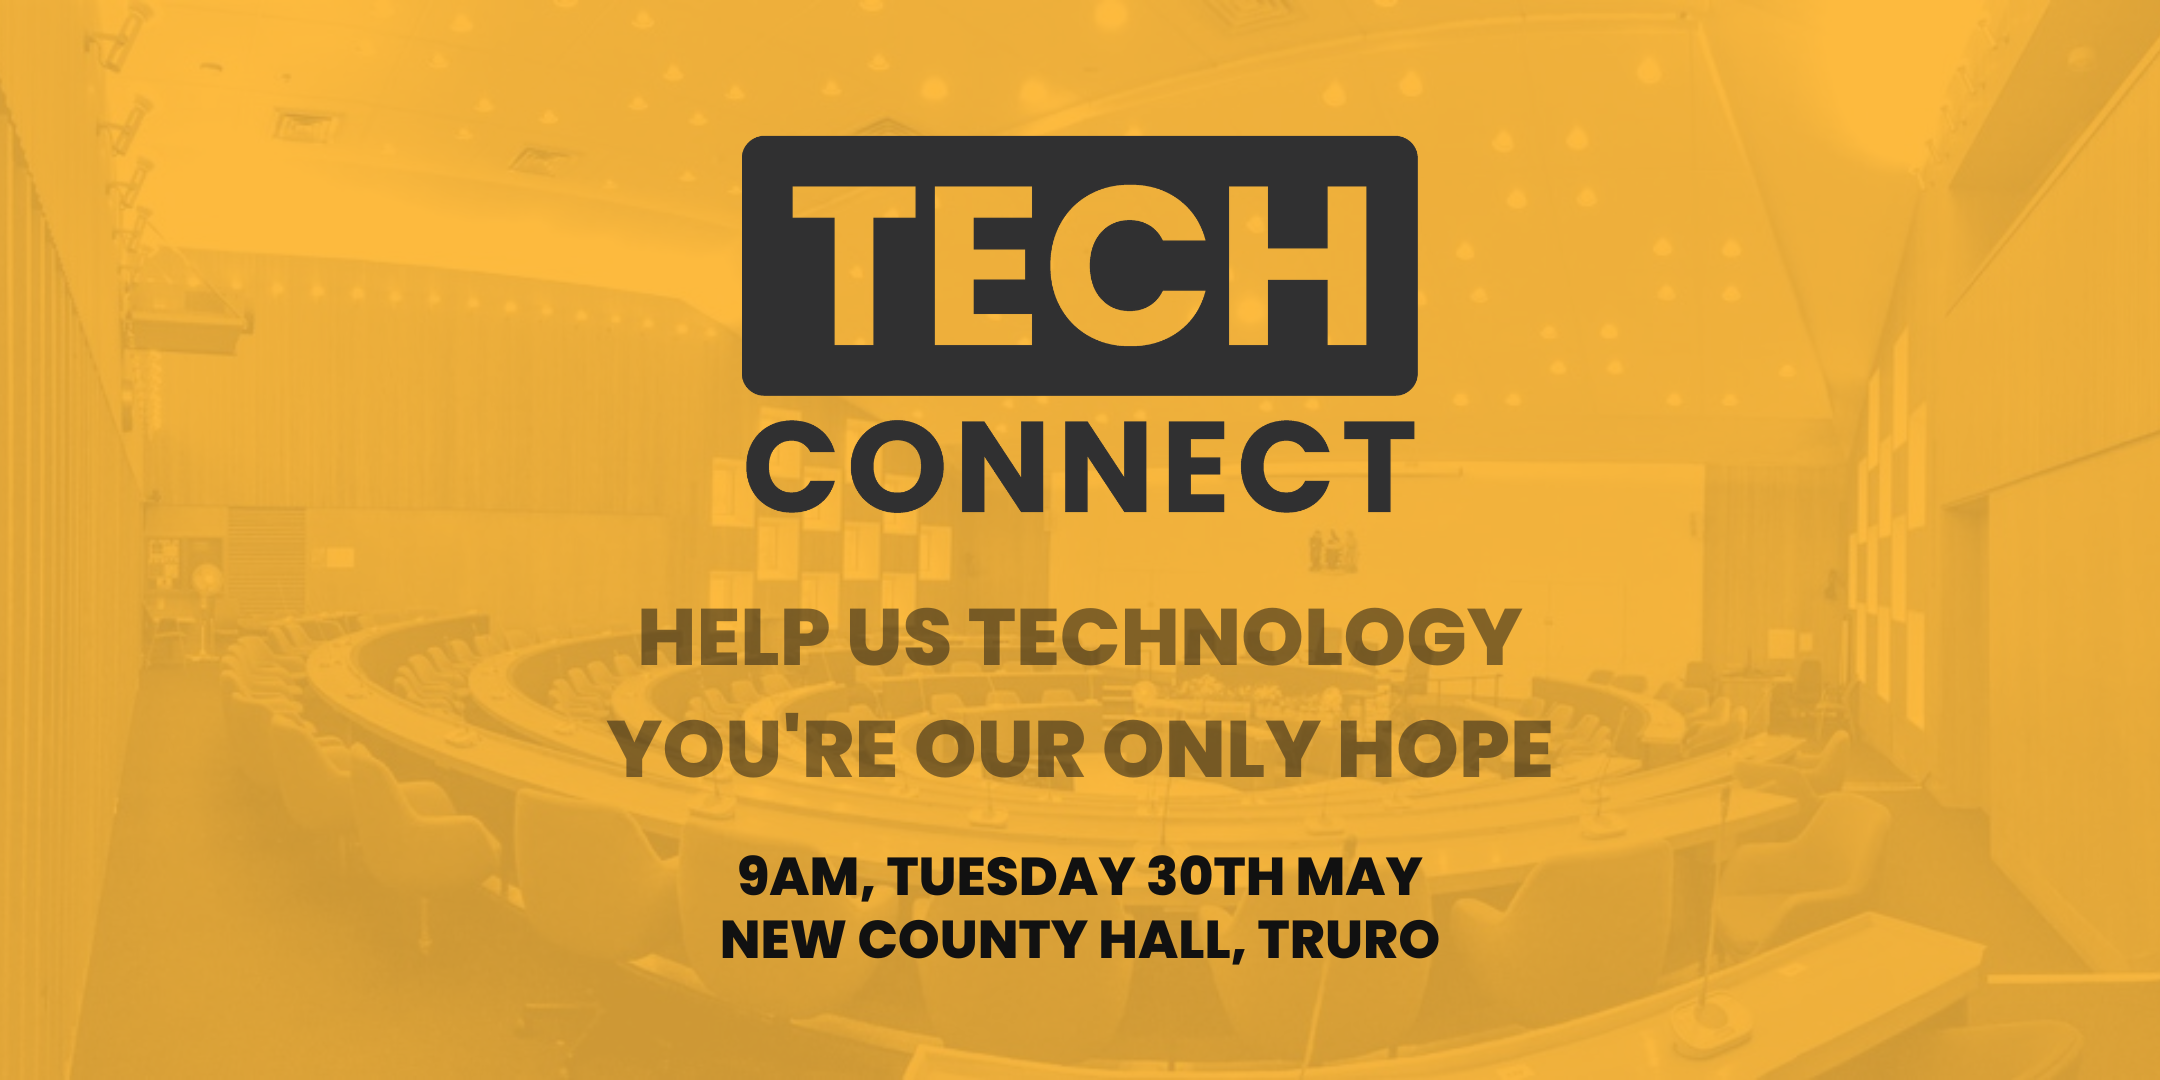 Software Cornwall, Tech Connect, 30th May 2023, County Hall, Truro. Meet up, networking and talks from Cornwall's tech community.